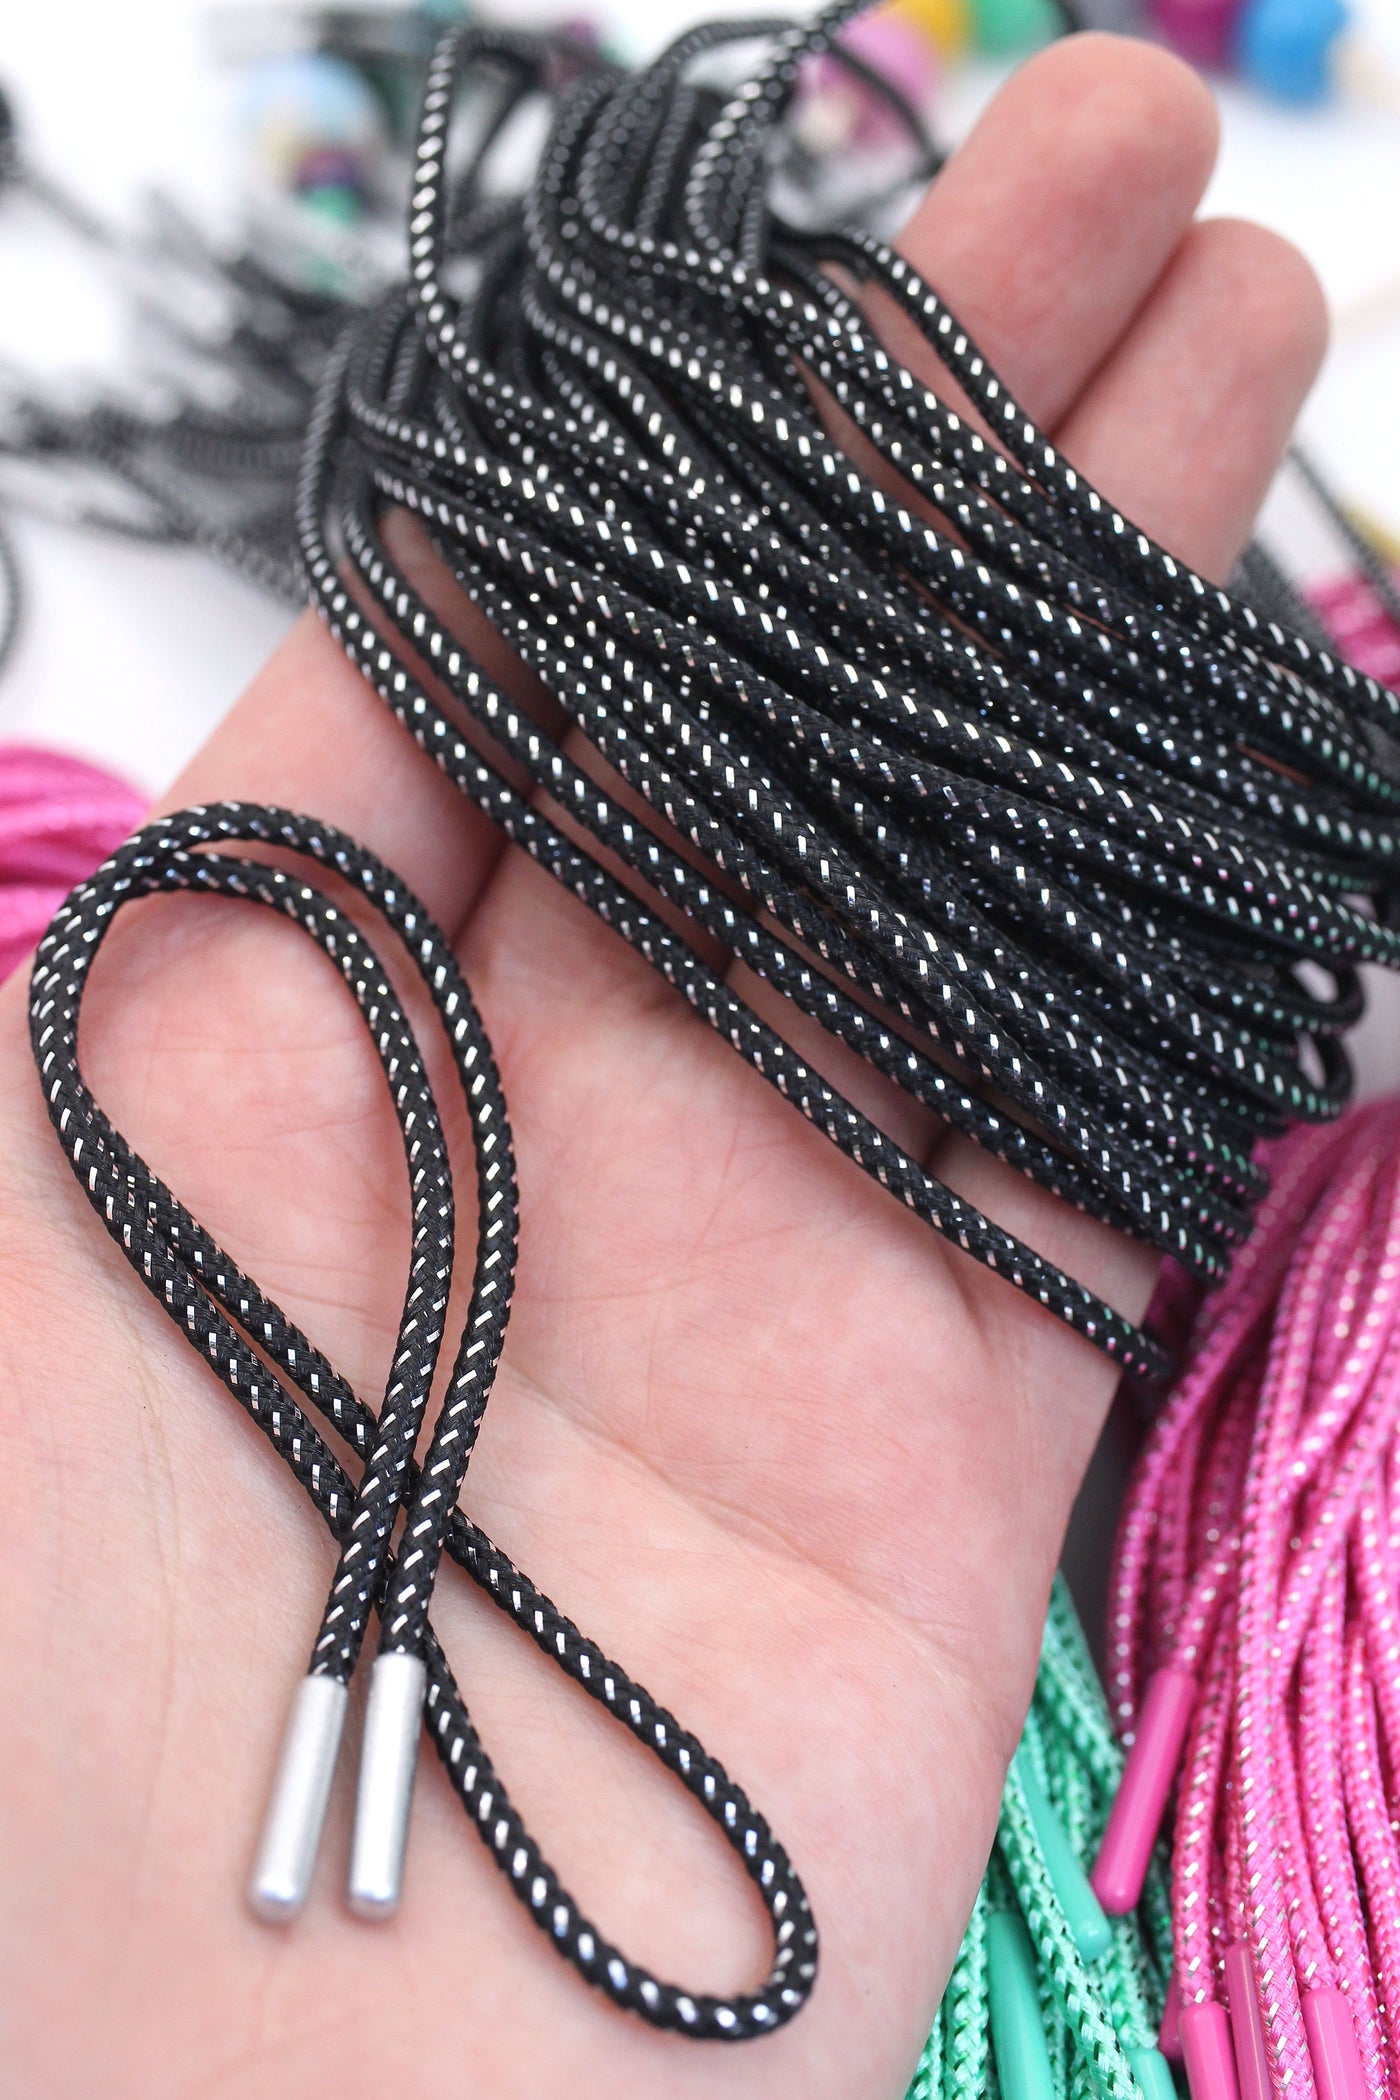 Braided Lurex Cords with Finished Ends, for Tie-On Bracelets & Necklaces, Reusable